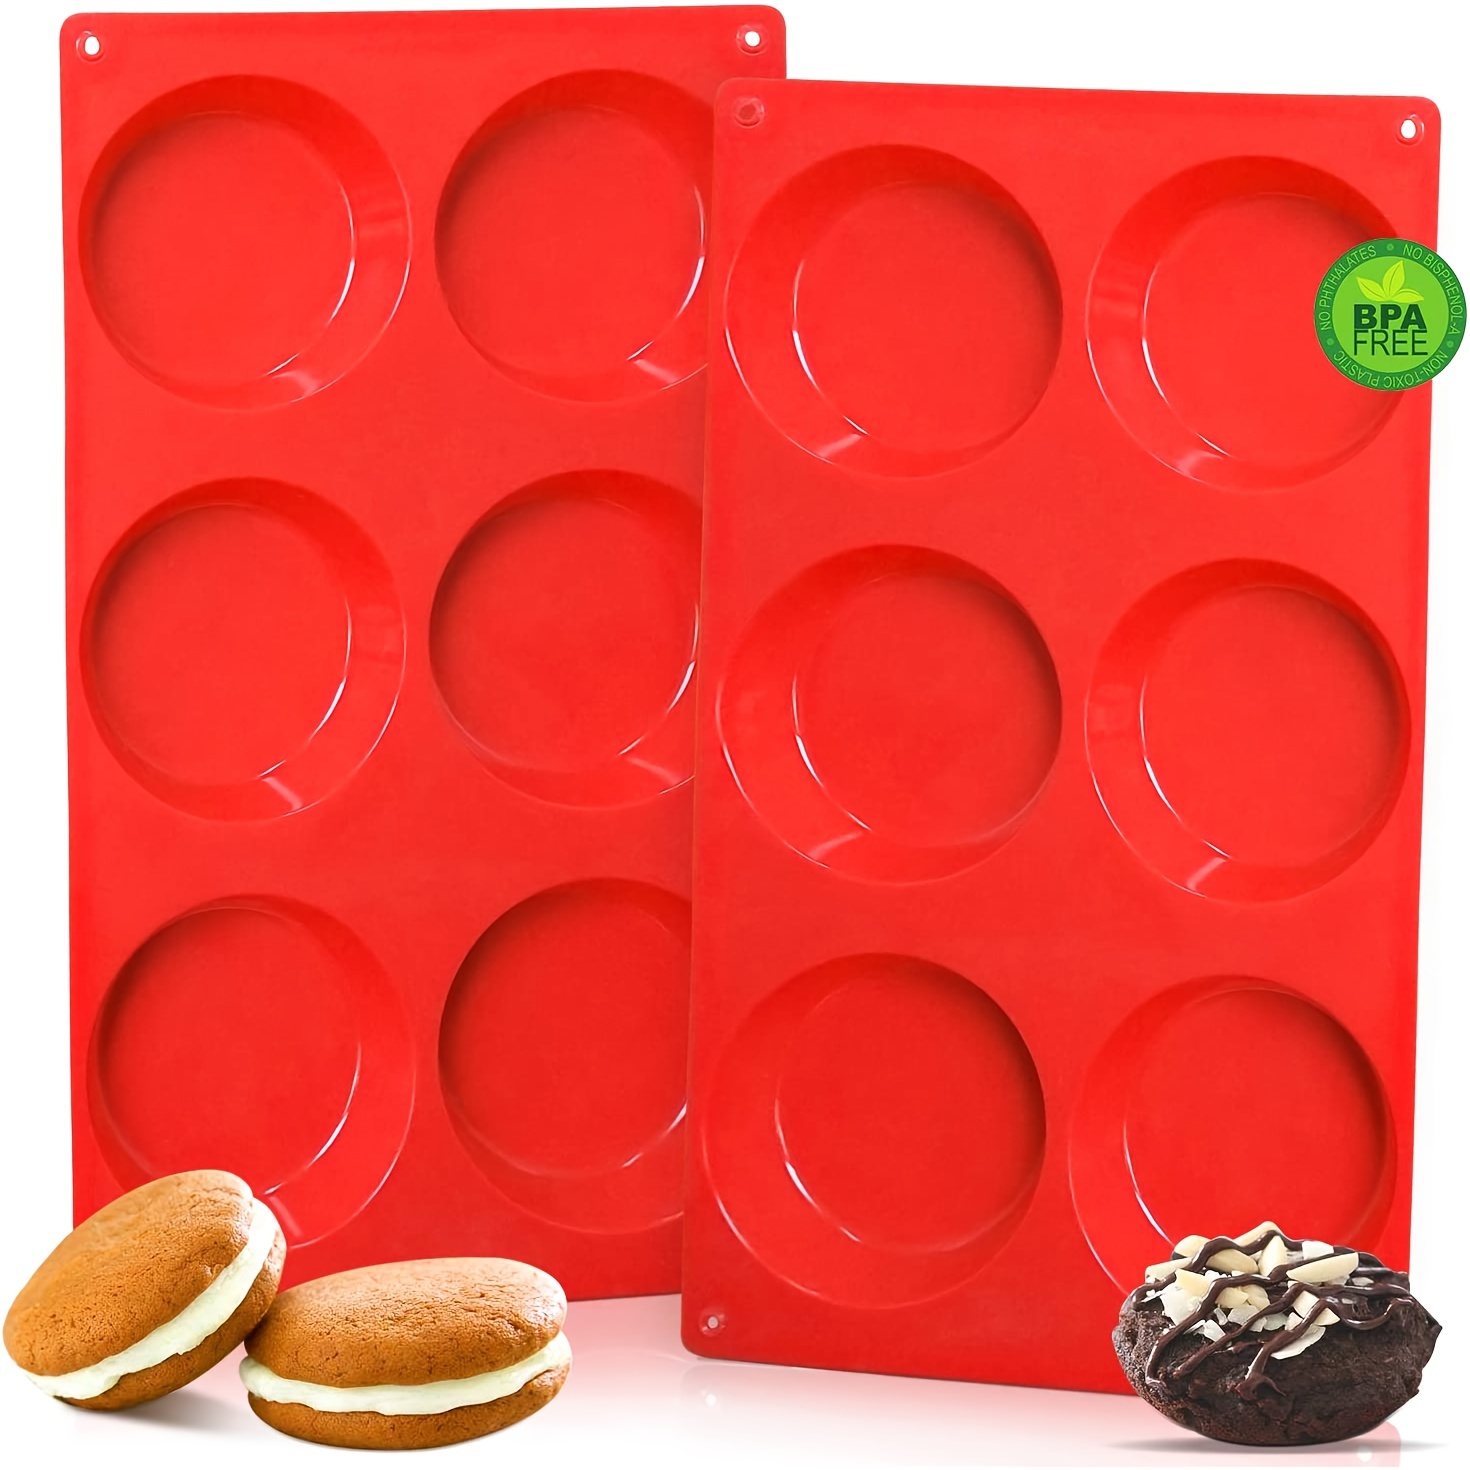  2 Pcs Large Silicone Molds for Baking, 6-Cavity Round Silicone  Baking Mold, Non-Stick 4” Baking Disc Molds for Whoopie Pie, Egg Pan,Muffin,  Candy, Soap, Hamburger, Resin Coasters (Red) : Home 